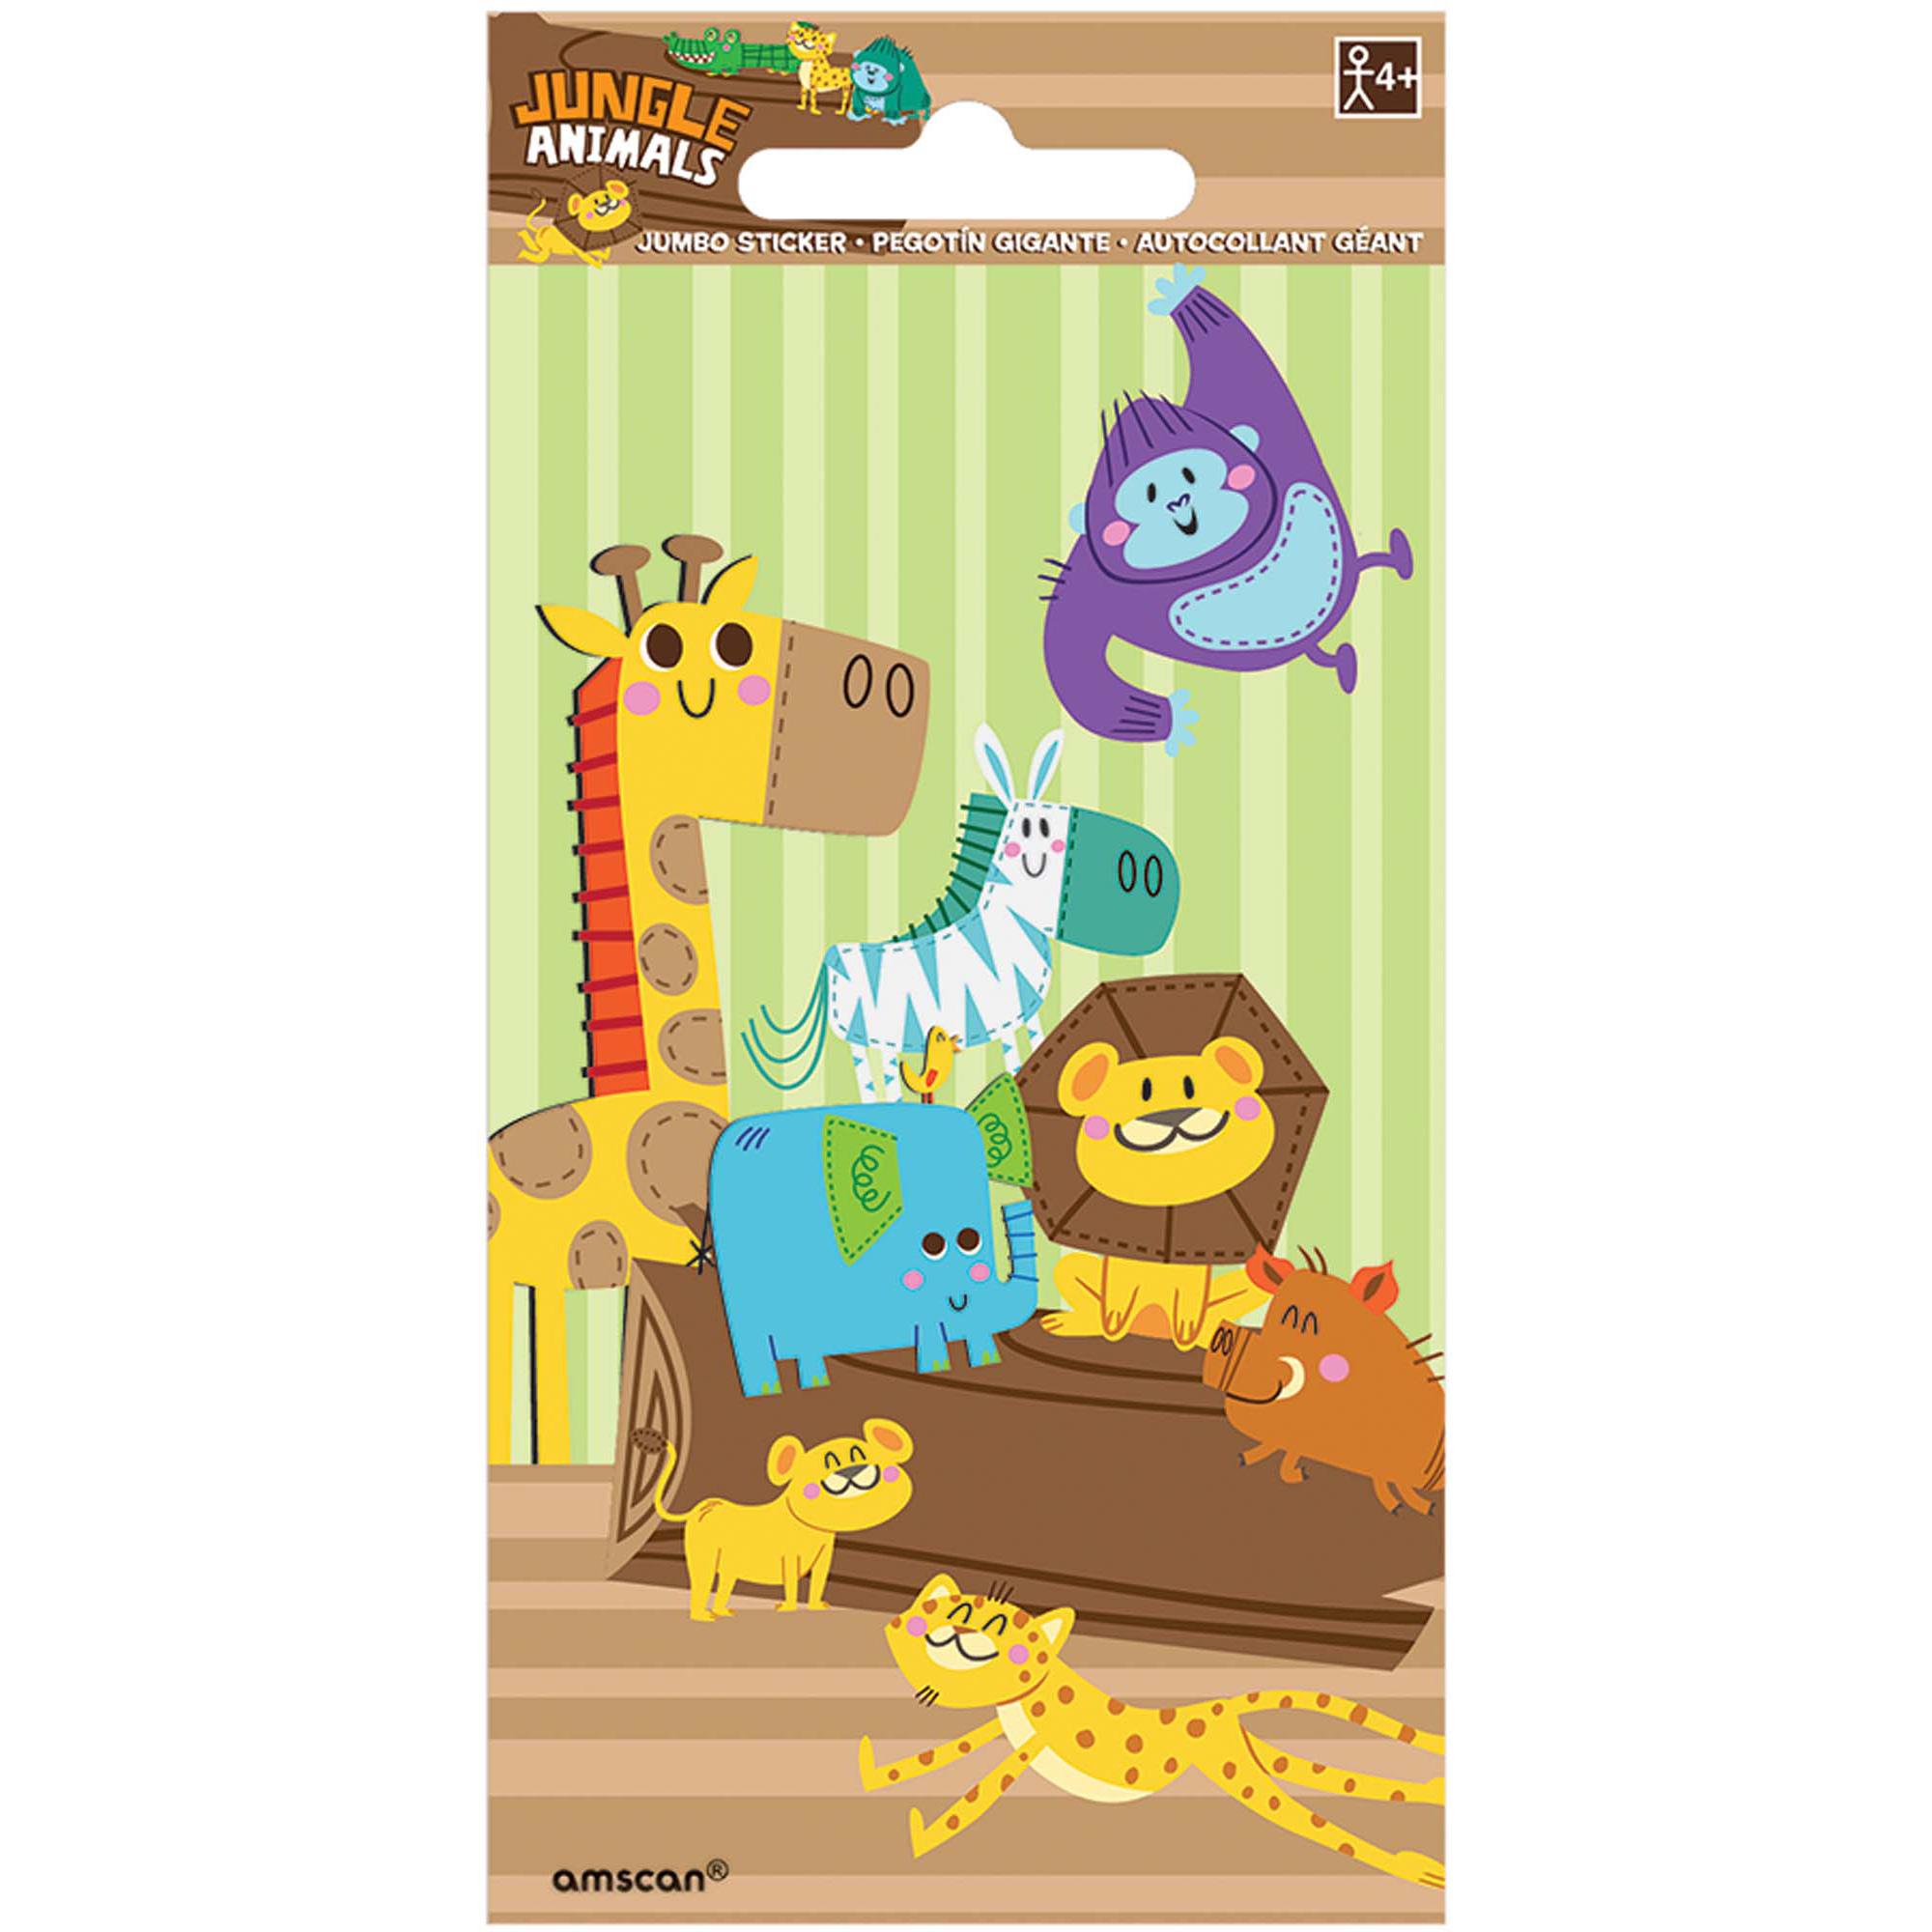 Jungle Animal Jumbo Sticker Party Favors - Party Centre